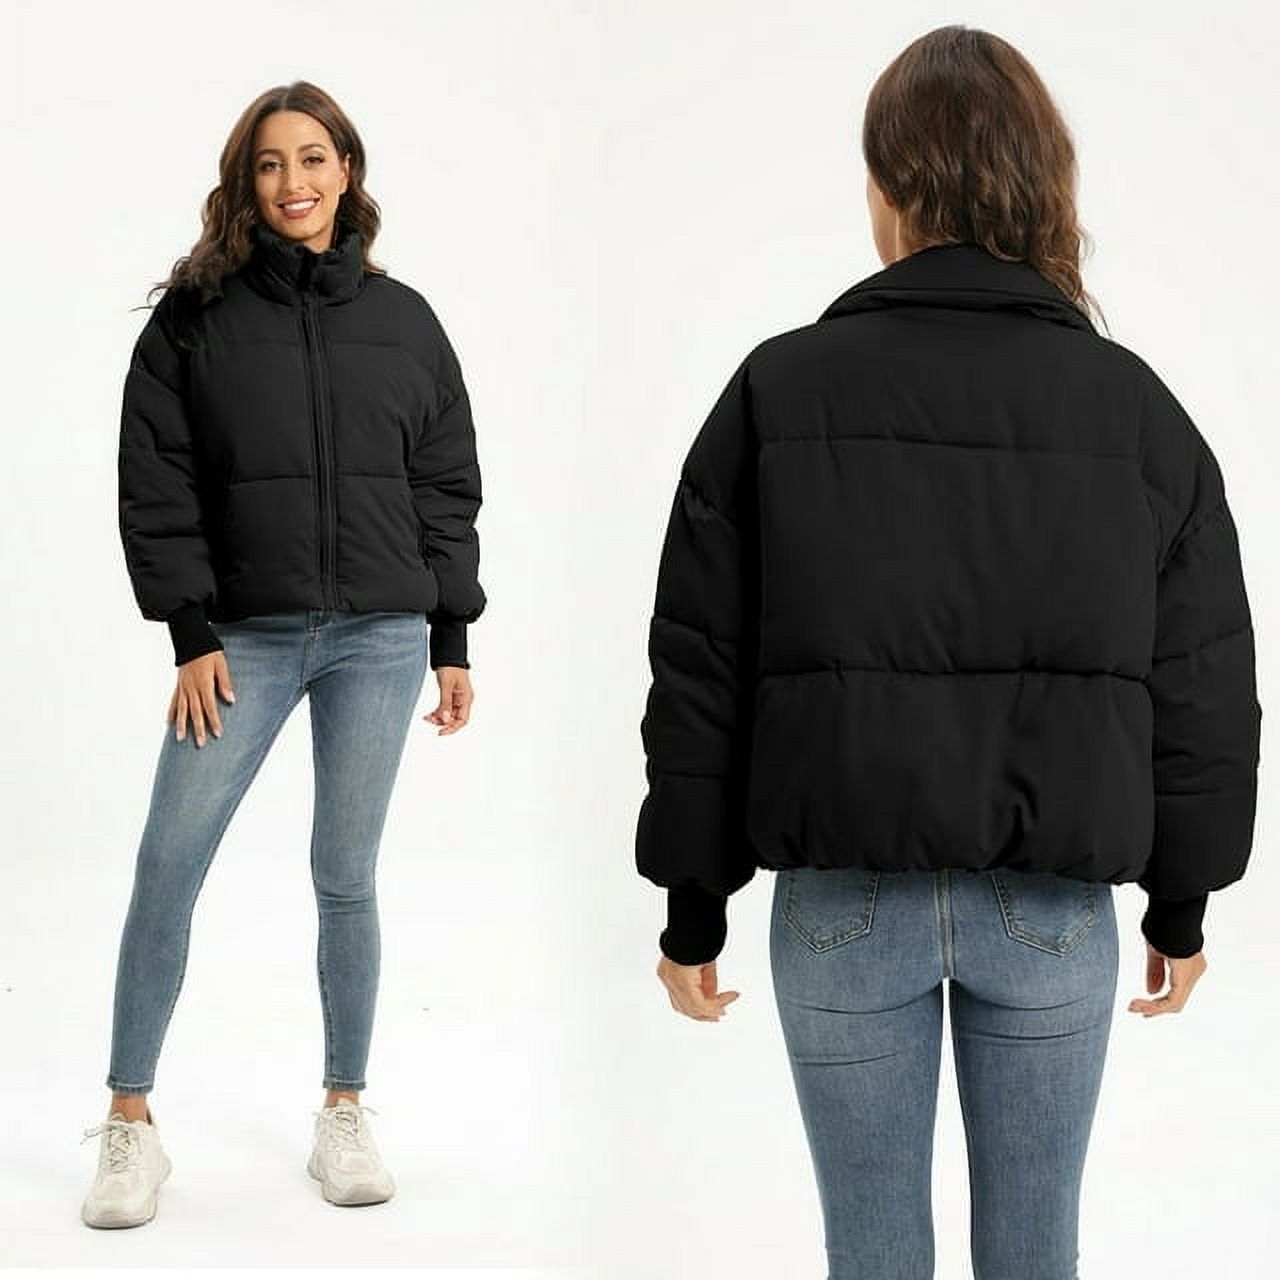 Movsou Women’s Cropped Puffer Jacket with Stand Collar - image 5 of 6